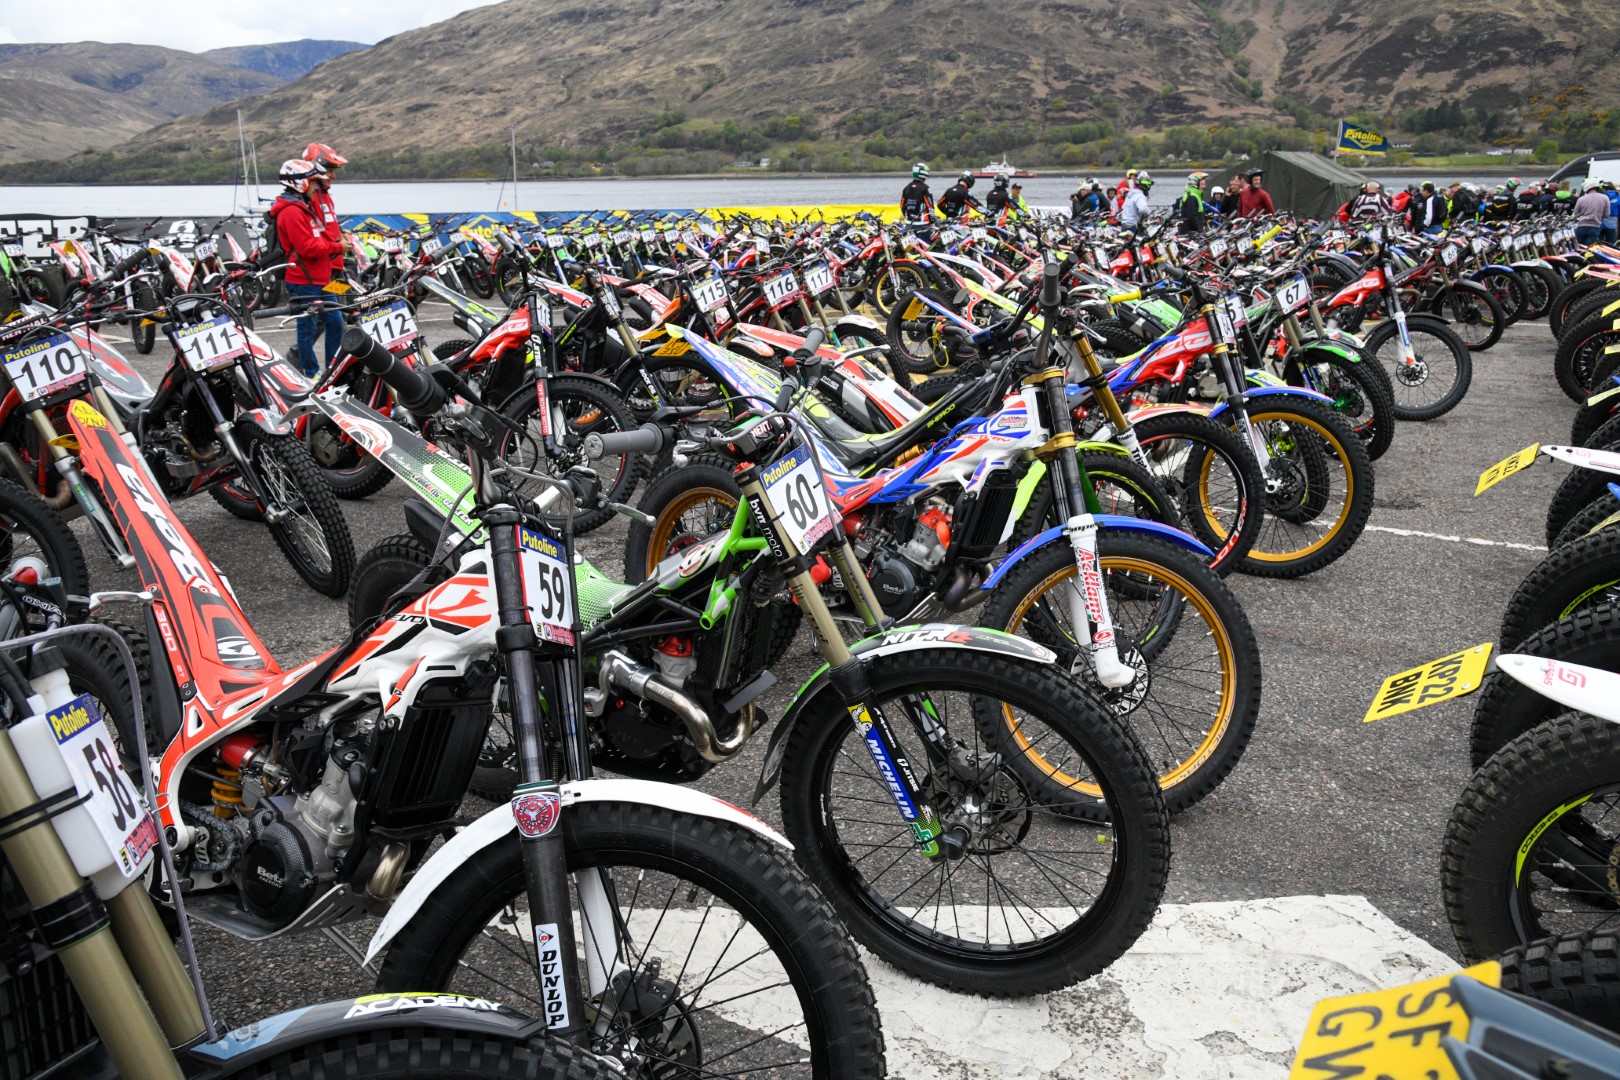 MICHELIN AT THE 2022 SCOTTISH SIX DAYS TRIAL – Trials Magazine